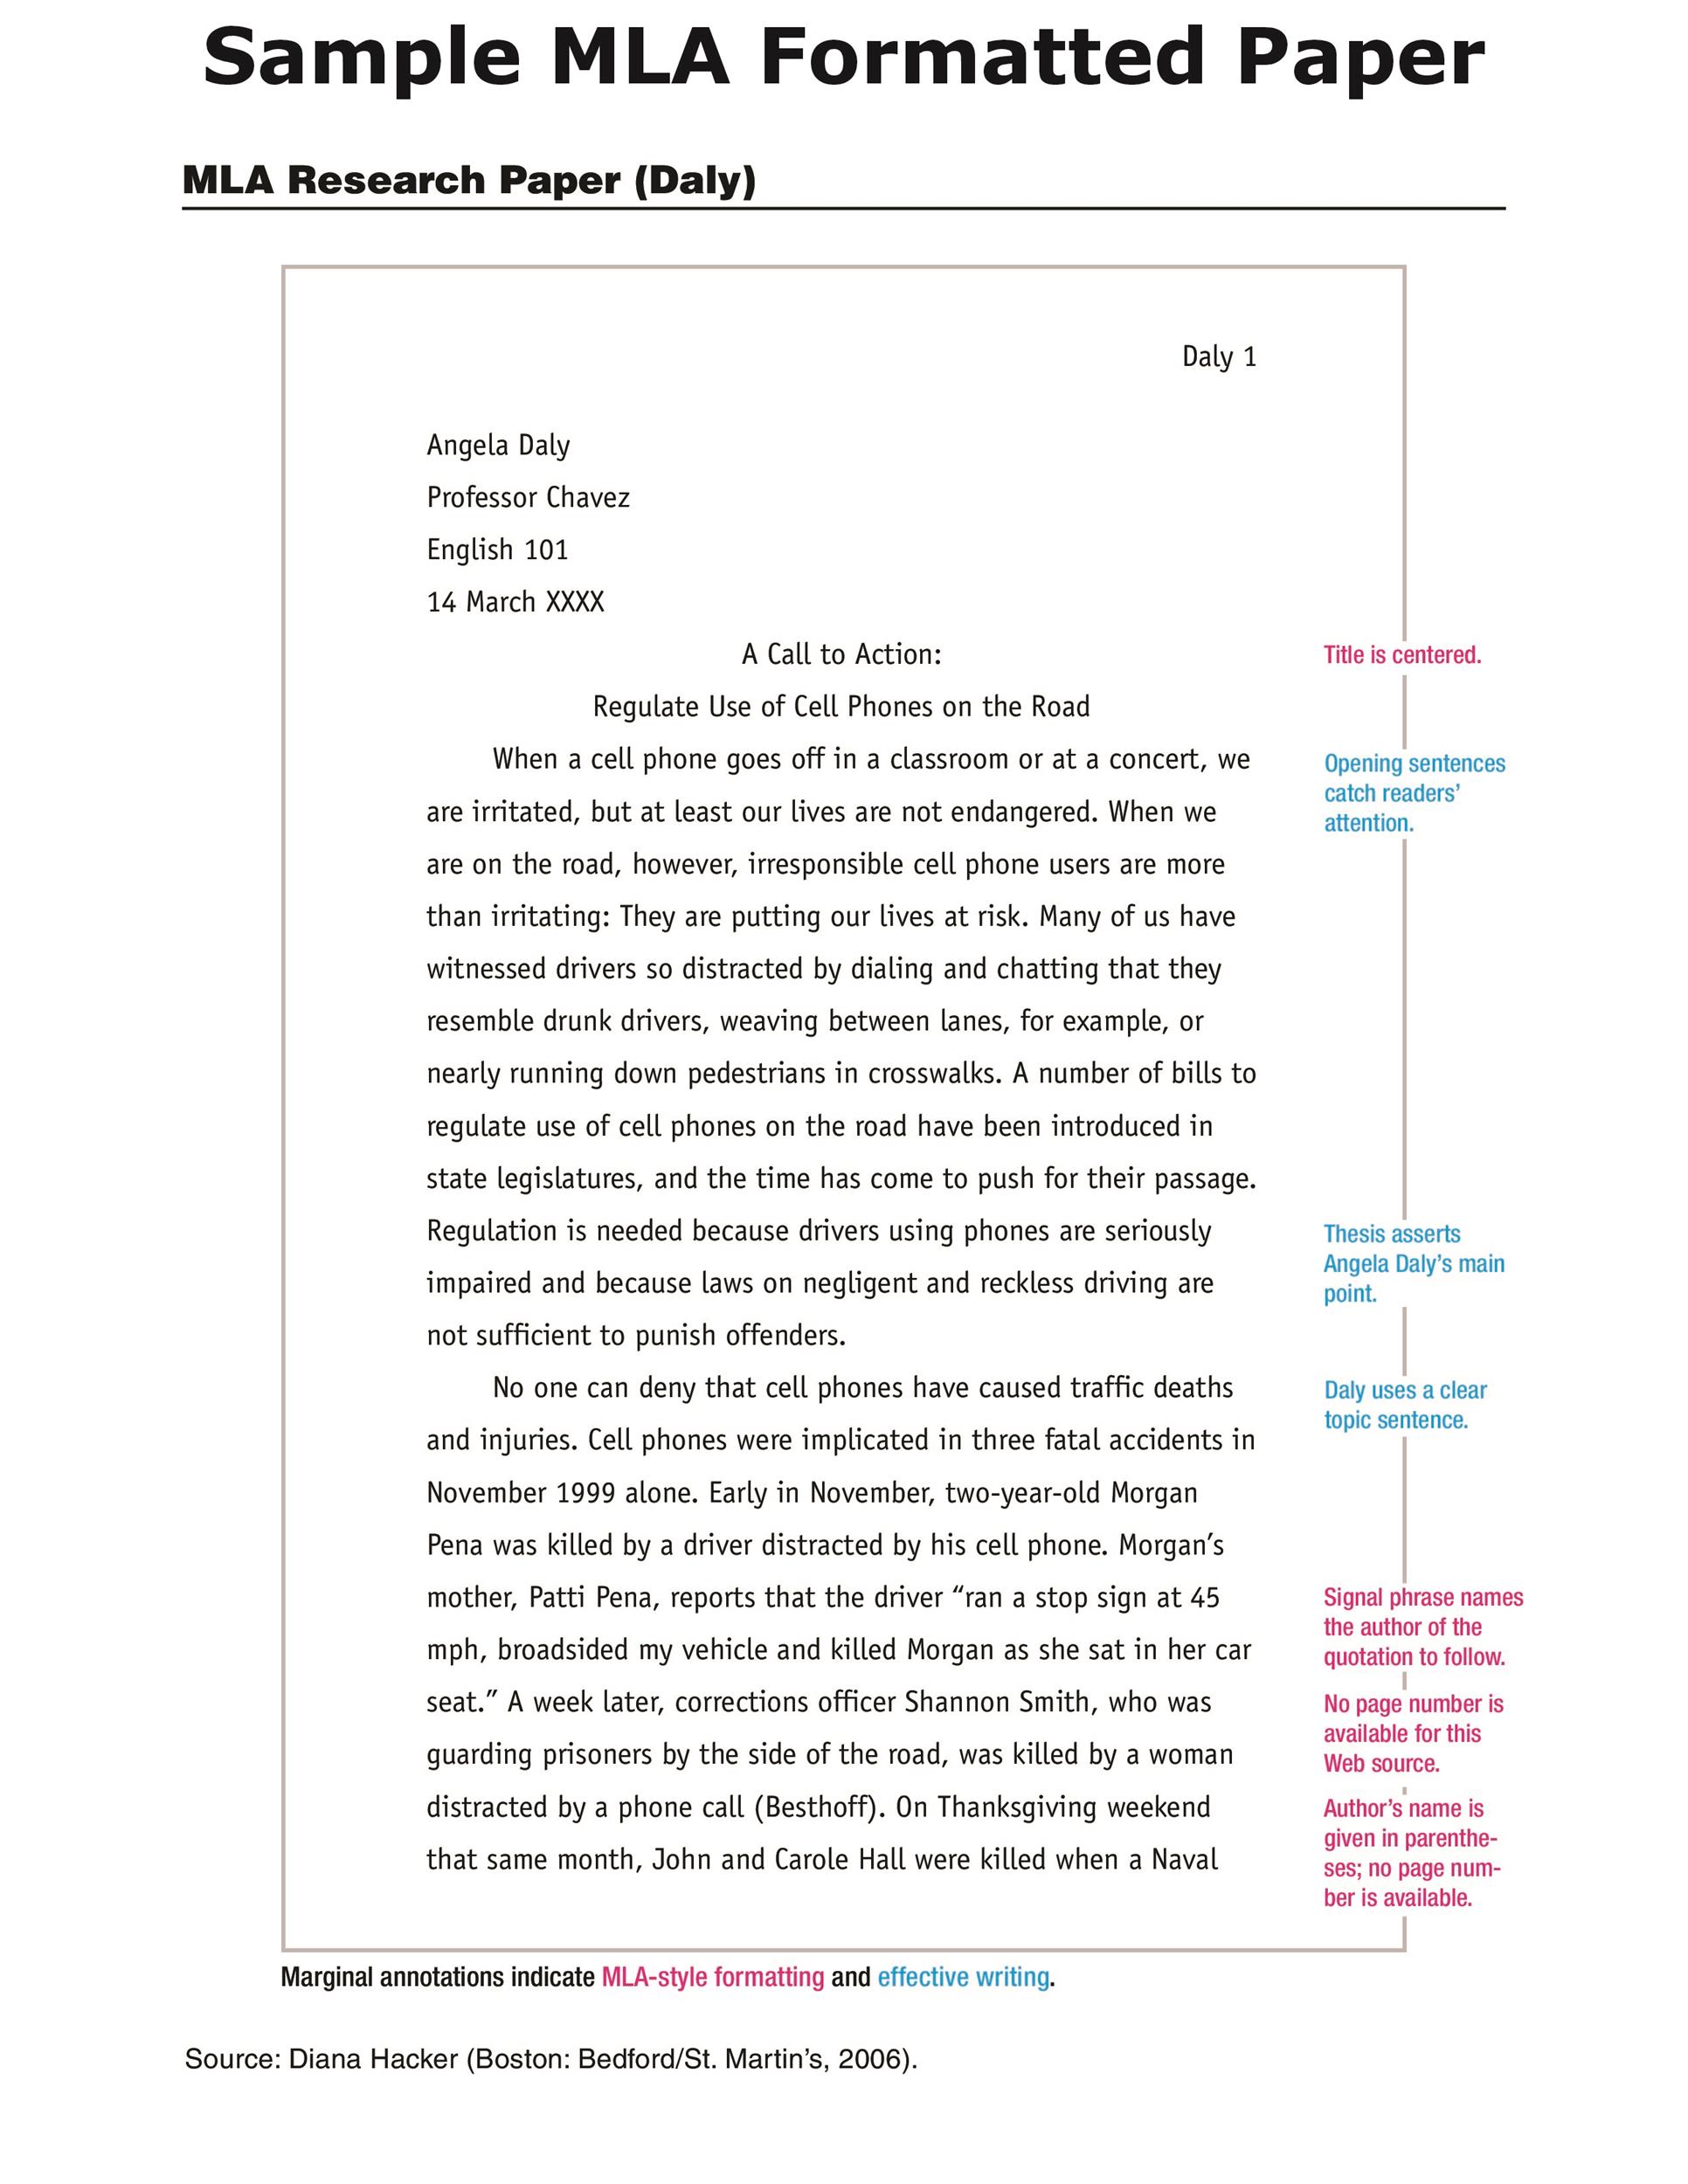 How to Cite a Thesis in MLA Style in a Bibliography | Pen and the Pad